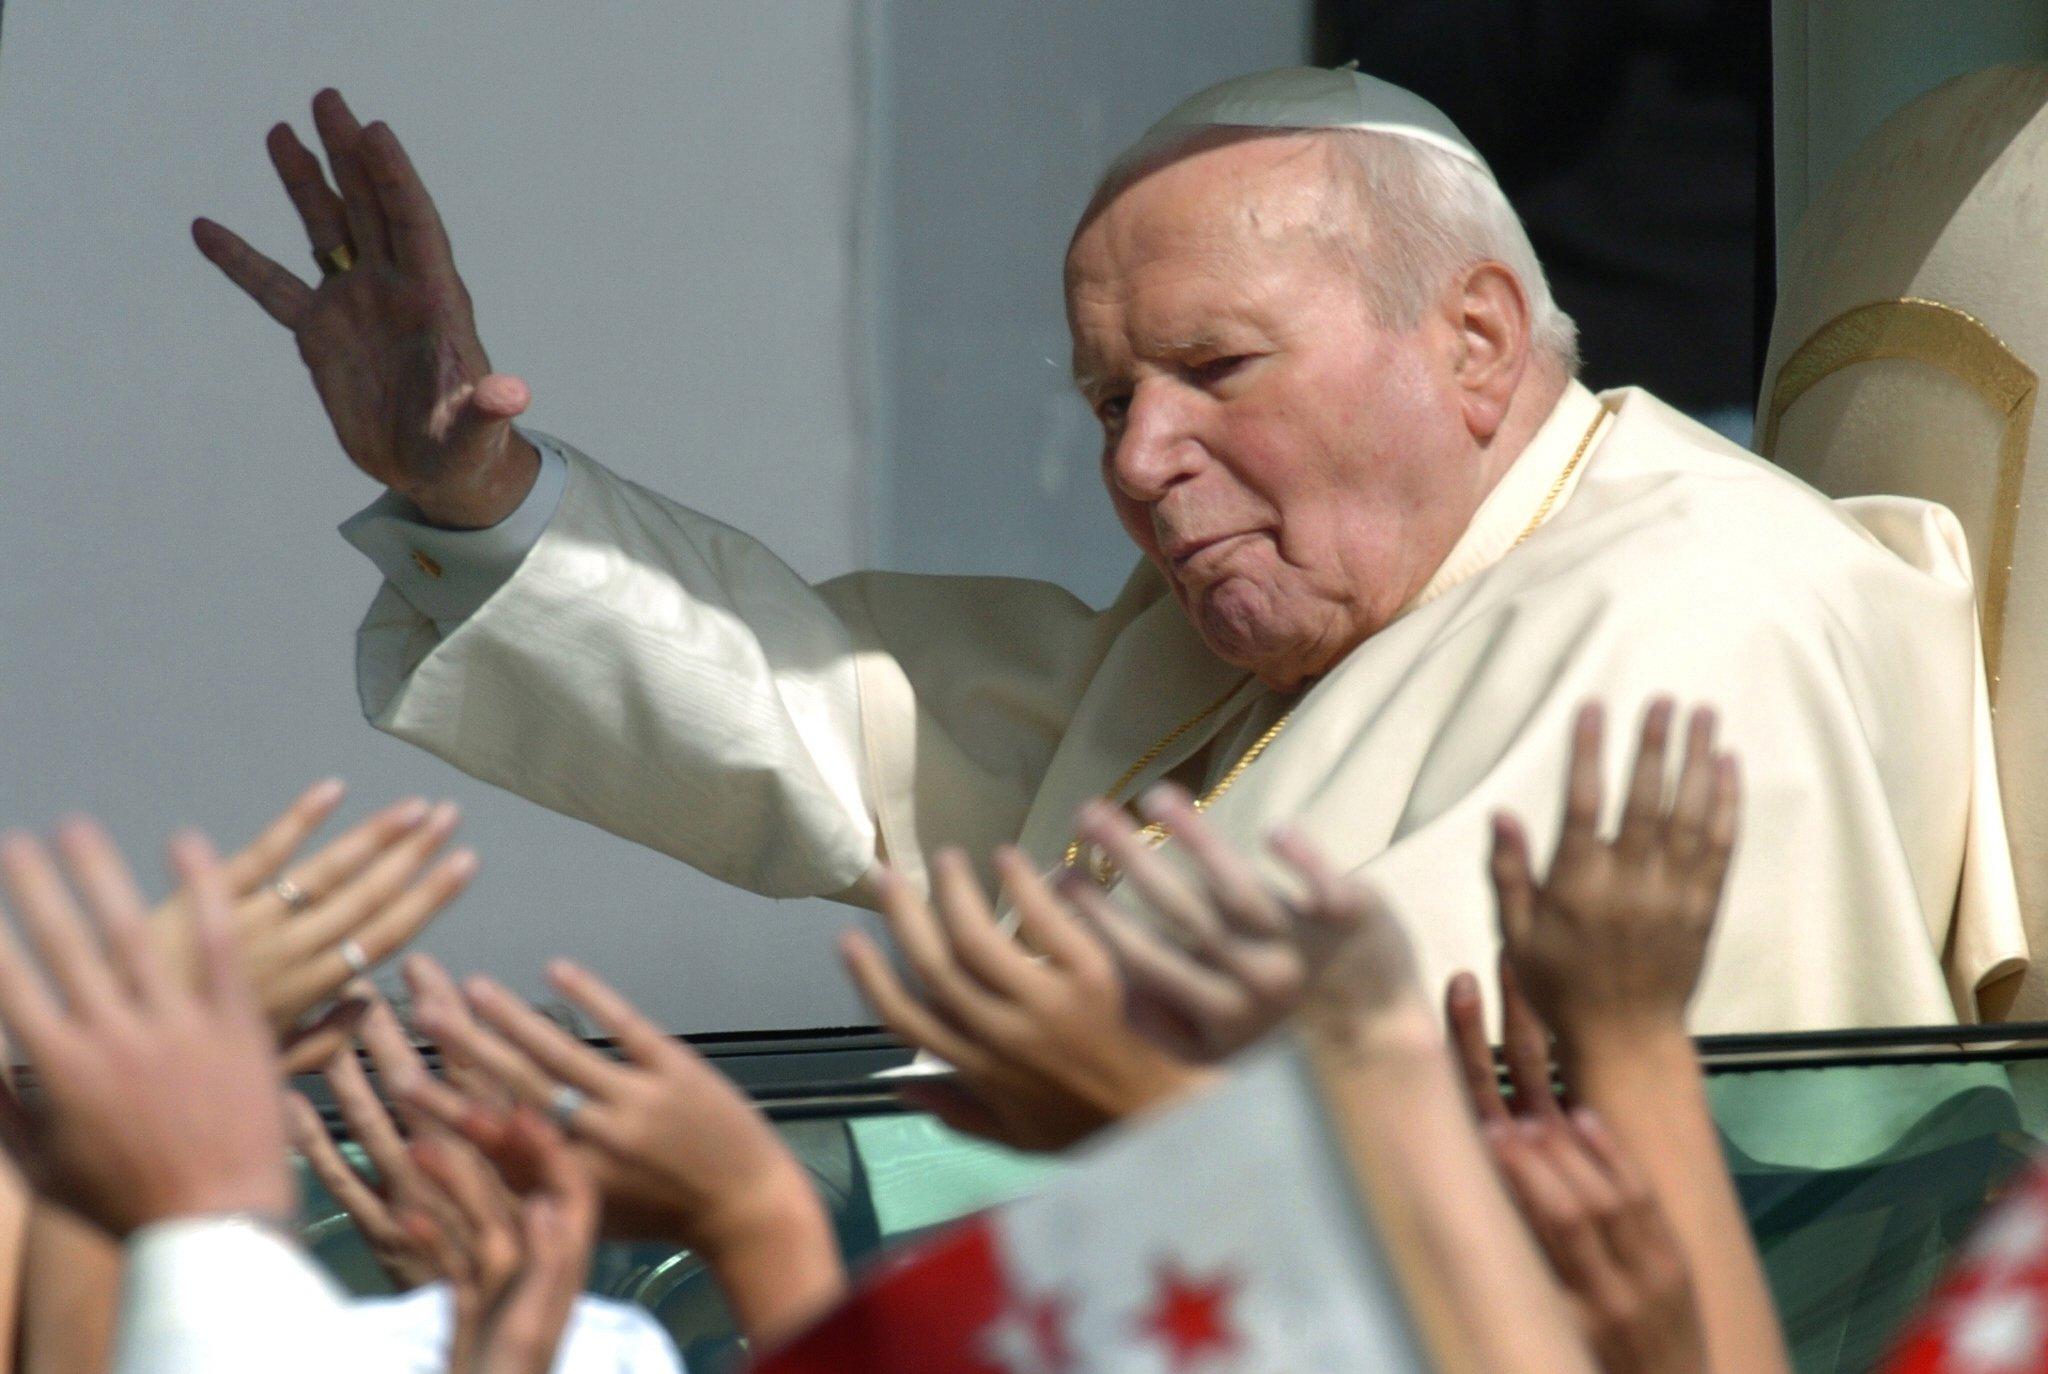 Pope John Paul II waves to a crowd of 70,000 faithfull gathered in Bern 06 June 2004. The pope launched a "pressing appeal for a commitment to unity for all Christians" amid some tensions between the Catholic and Protestant church hierarchies in Switzerland, which are equally represented in the country. AFP PHOTO MARTIN BUREAU (Photo by MARTIN BUREAU / AFP)